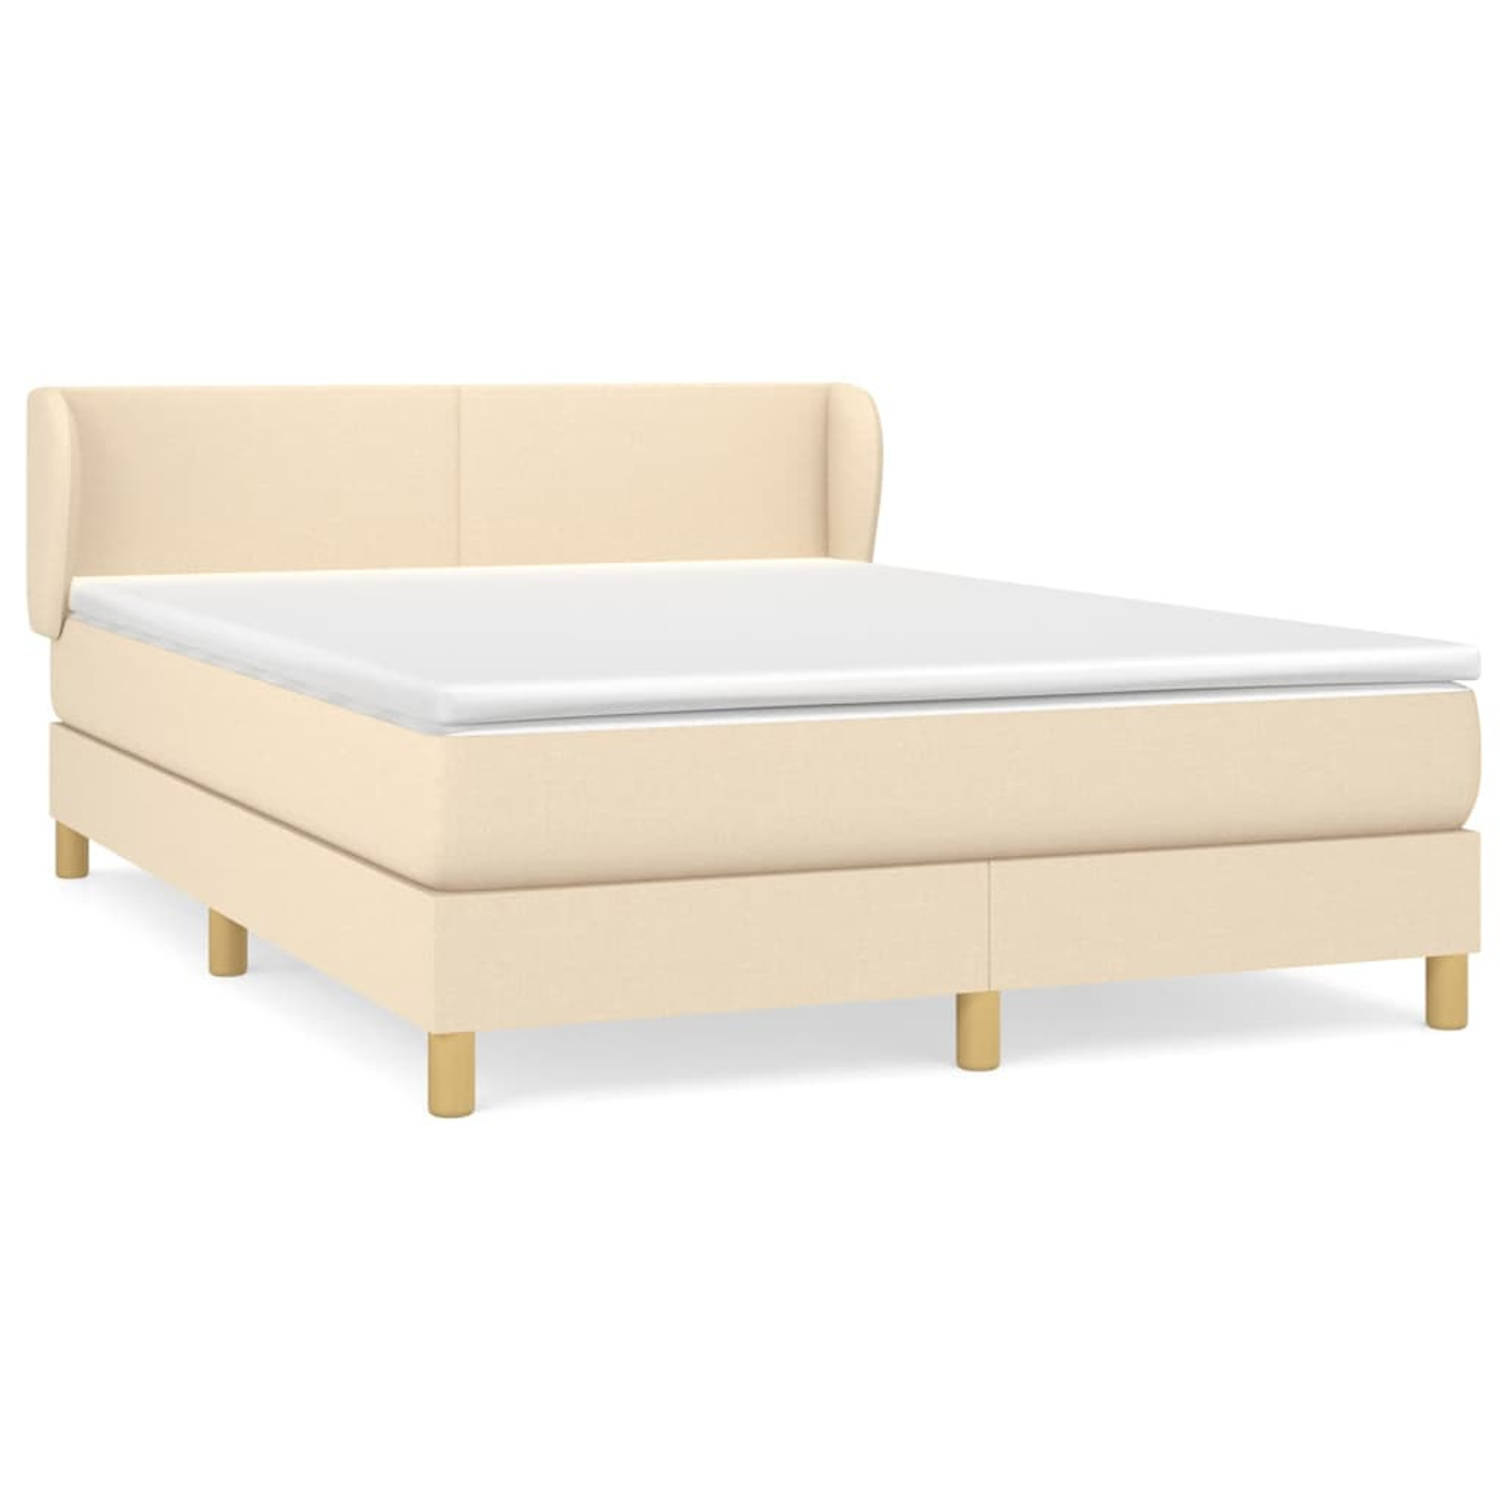 The Living Store Boxspringbed - Comfort - Bed - 203 x 147 x 78/88 cm - Crème